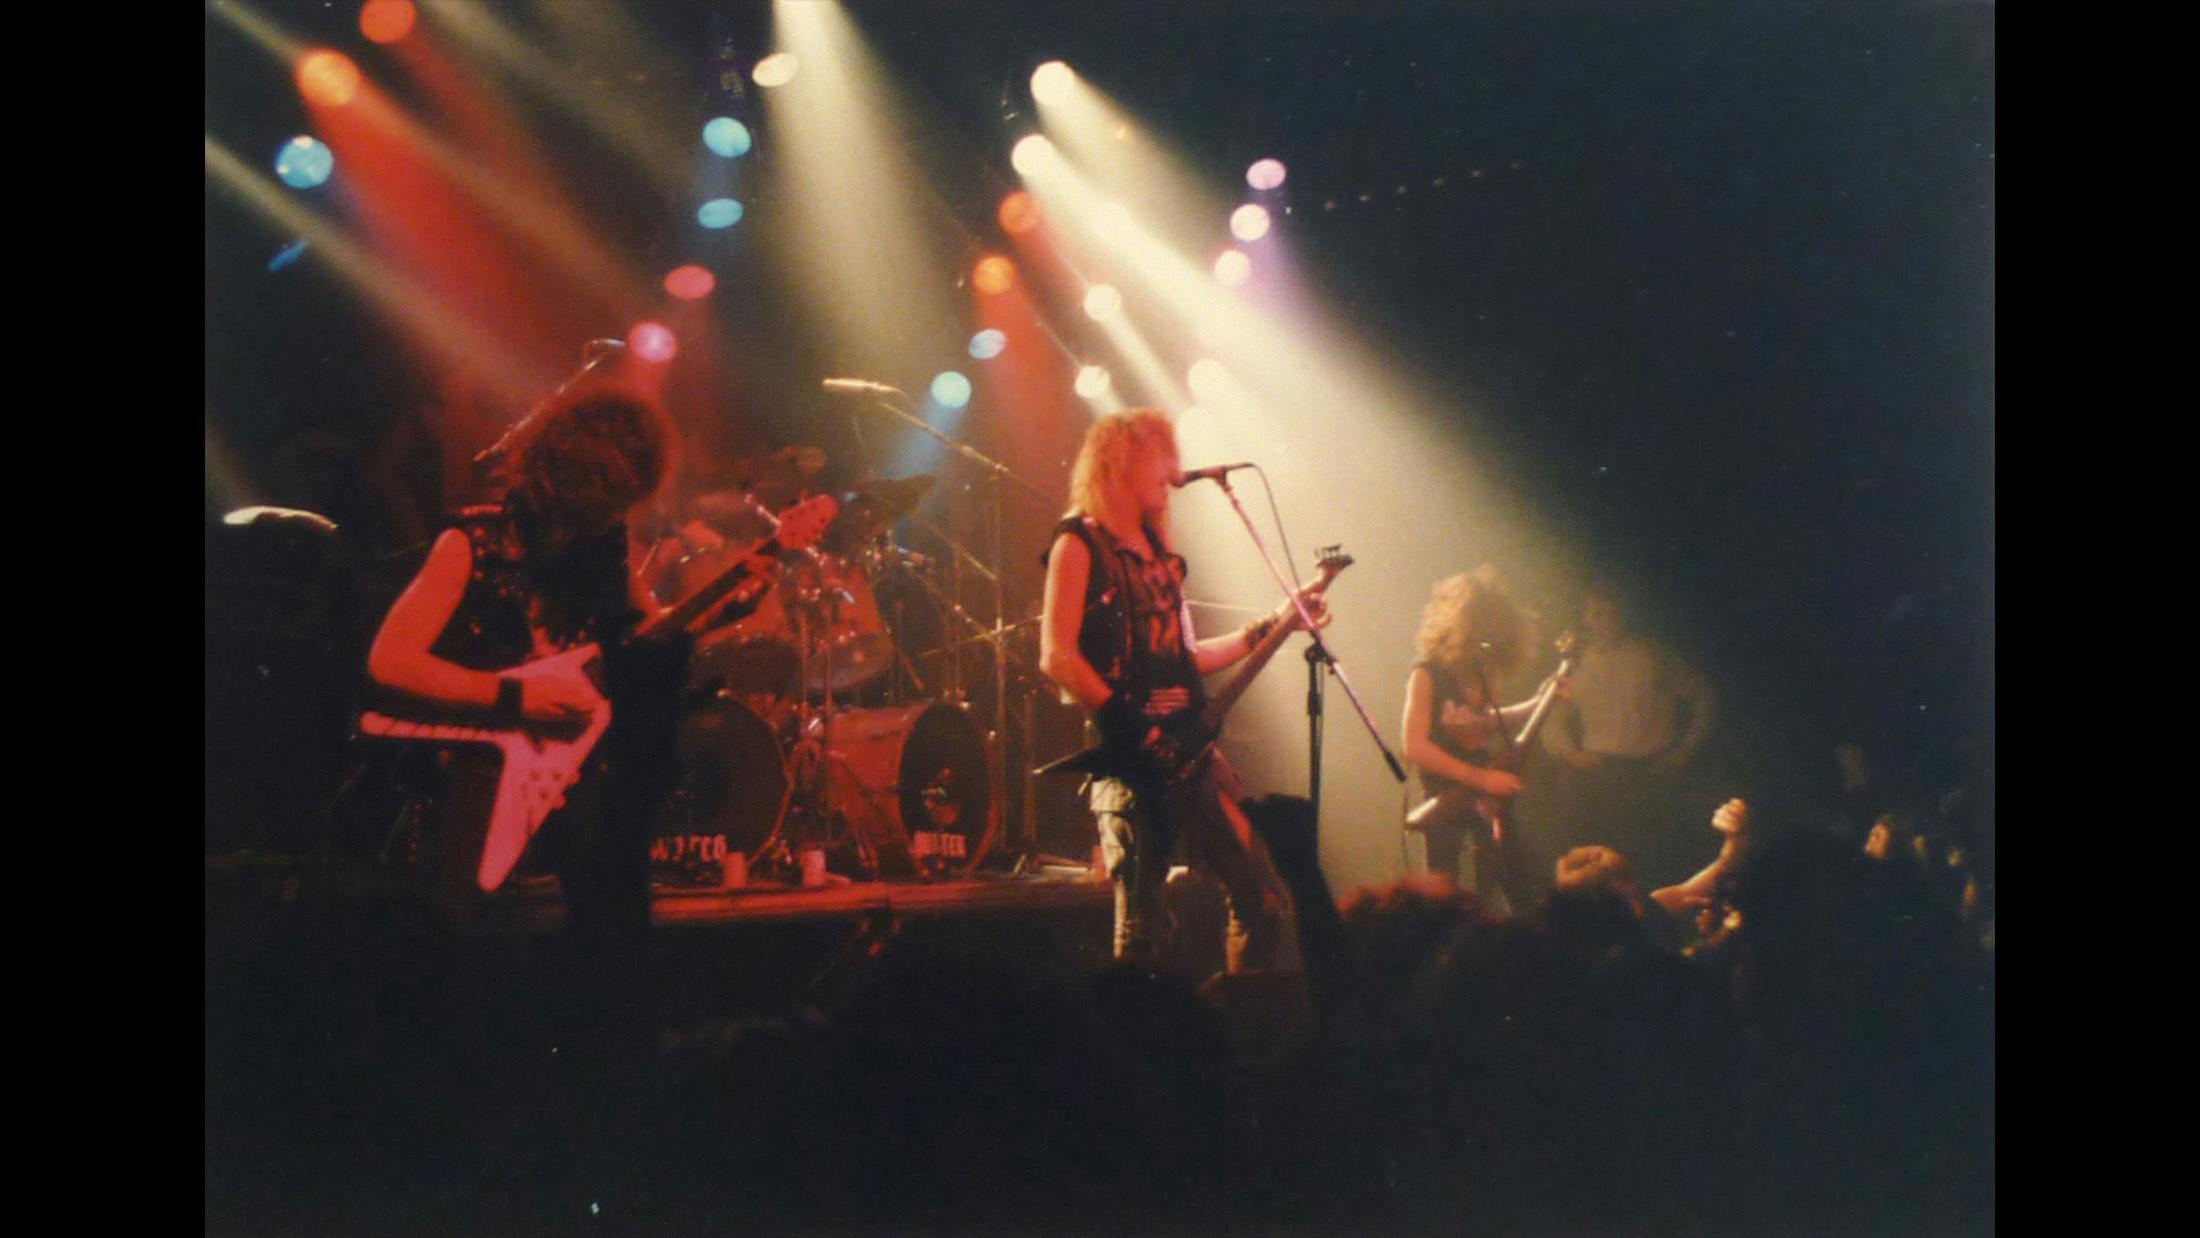 On our first headlining tour in 1986, together with Kreator and Rage. This show in Zeche Bochum in Germany was one of the wildest we have ever played. The German Ruhrgebiet is the industrial area of the country and had the craziest metal scene in the country back in the day.